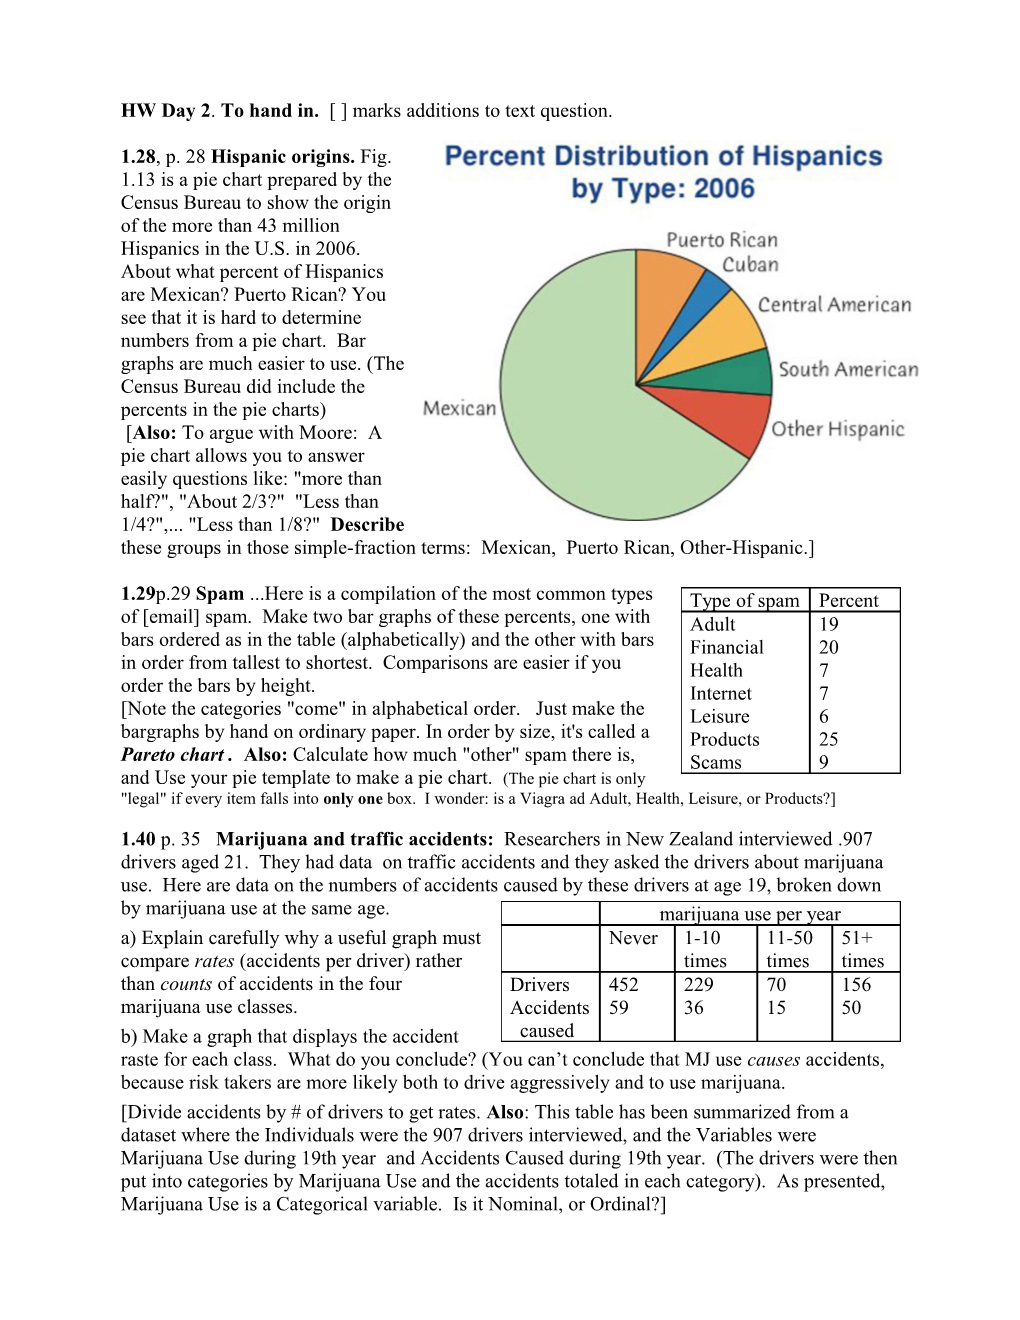 1.28, P. 28 Hispanic Origins. Fig. 1.13 Is a Pie Chart Prepared by the Census Bureau To